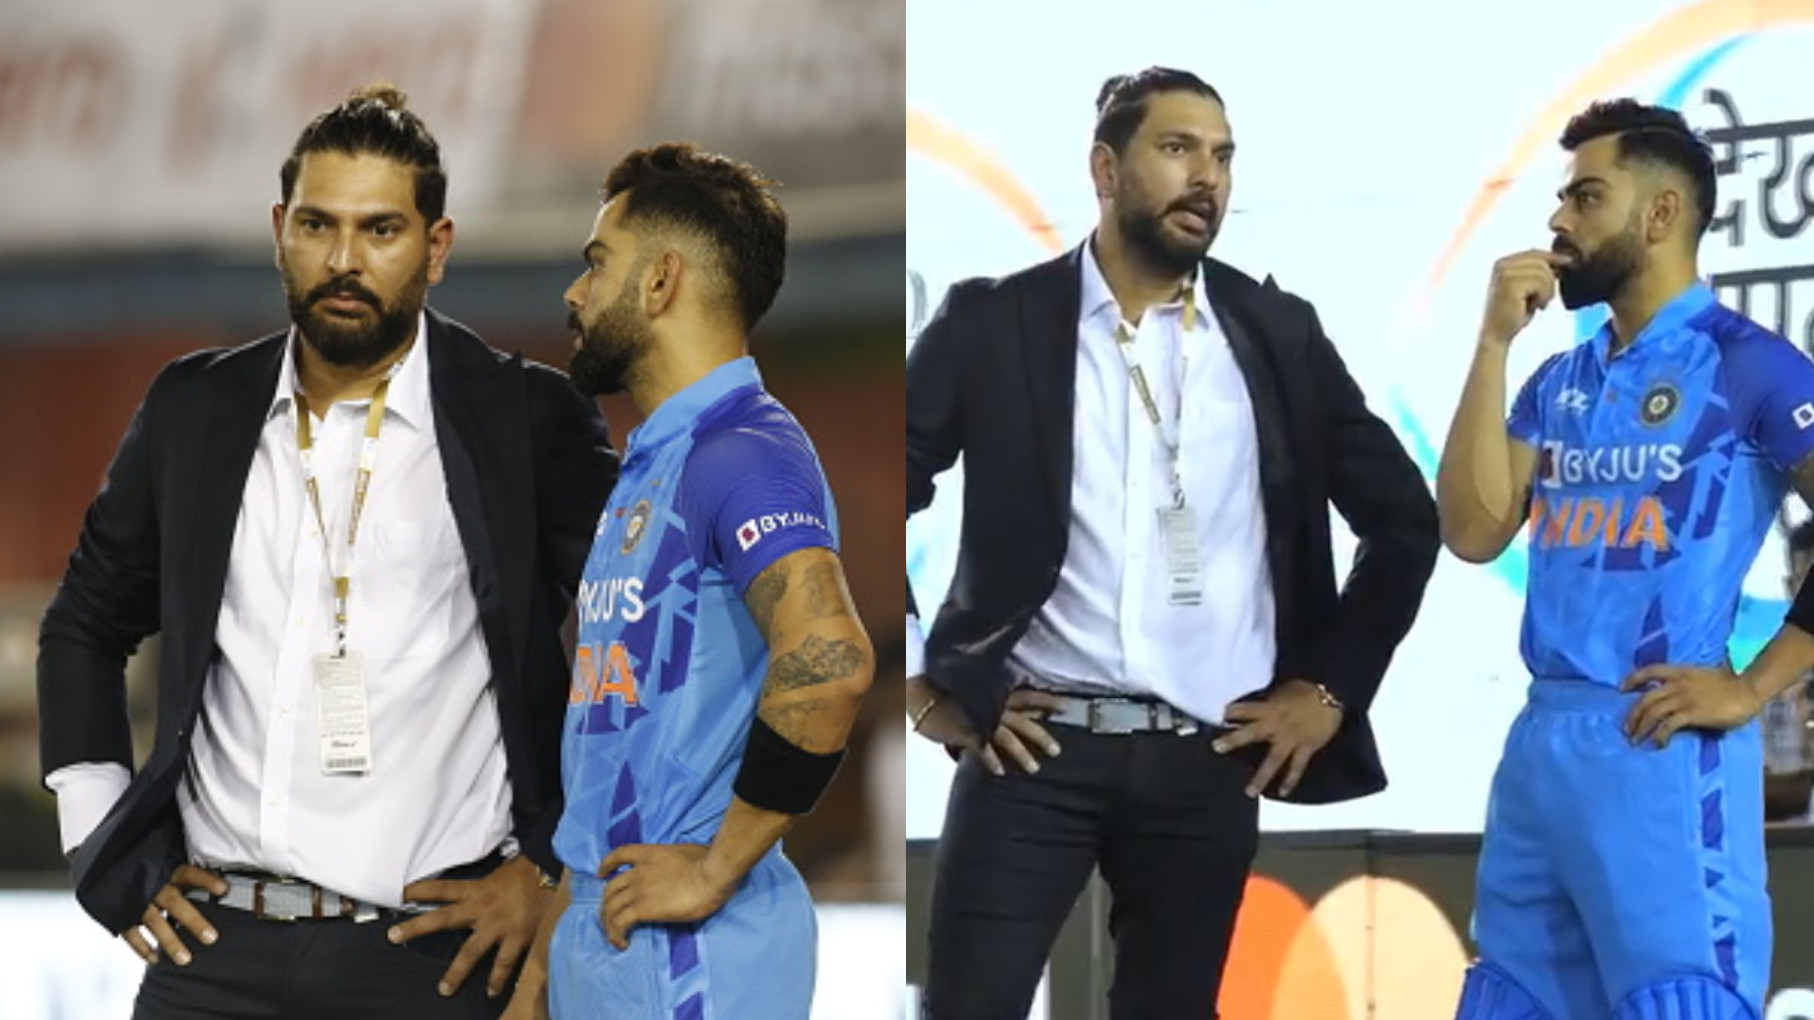 IND v AUS 2022: WATCH- Yuvraj Singh and Virat Kohli have a conversation ahead of 1st T20I in Mohali